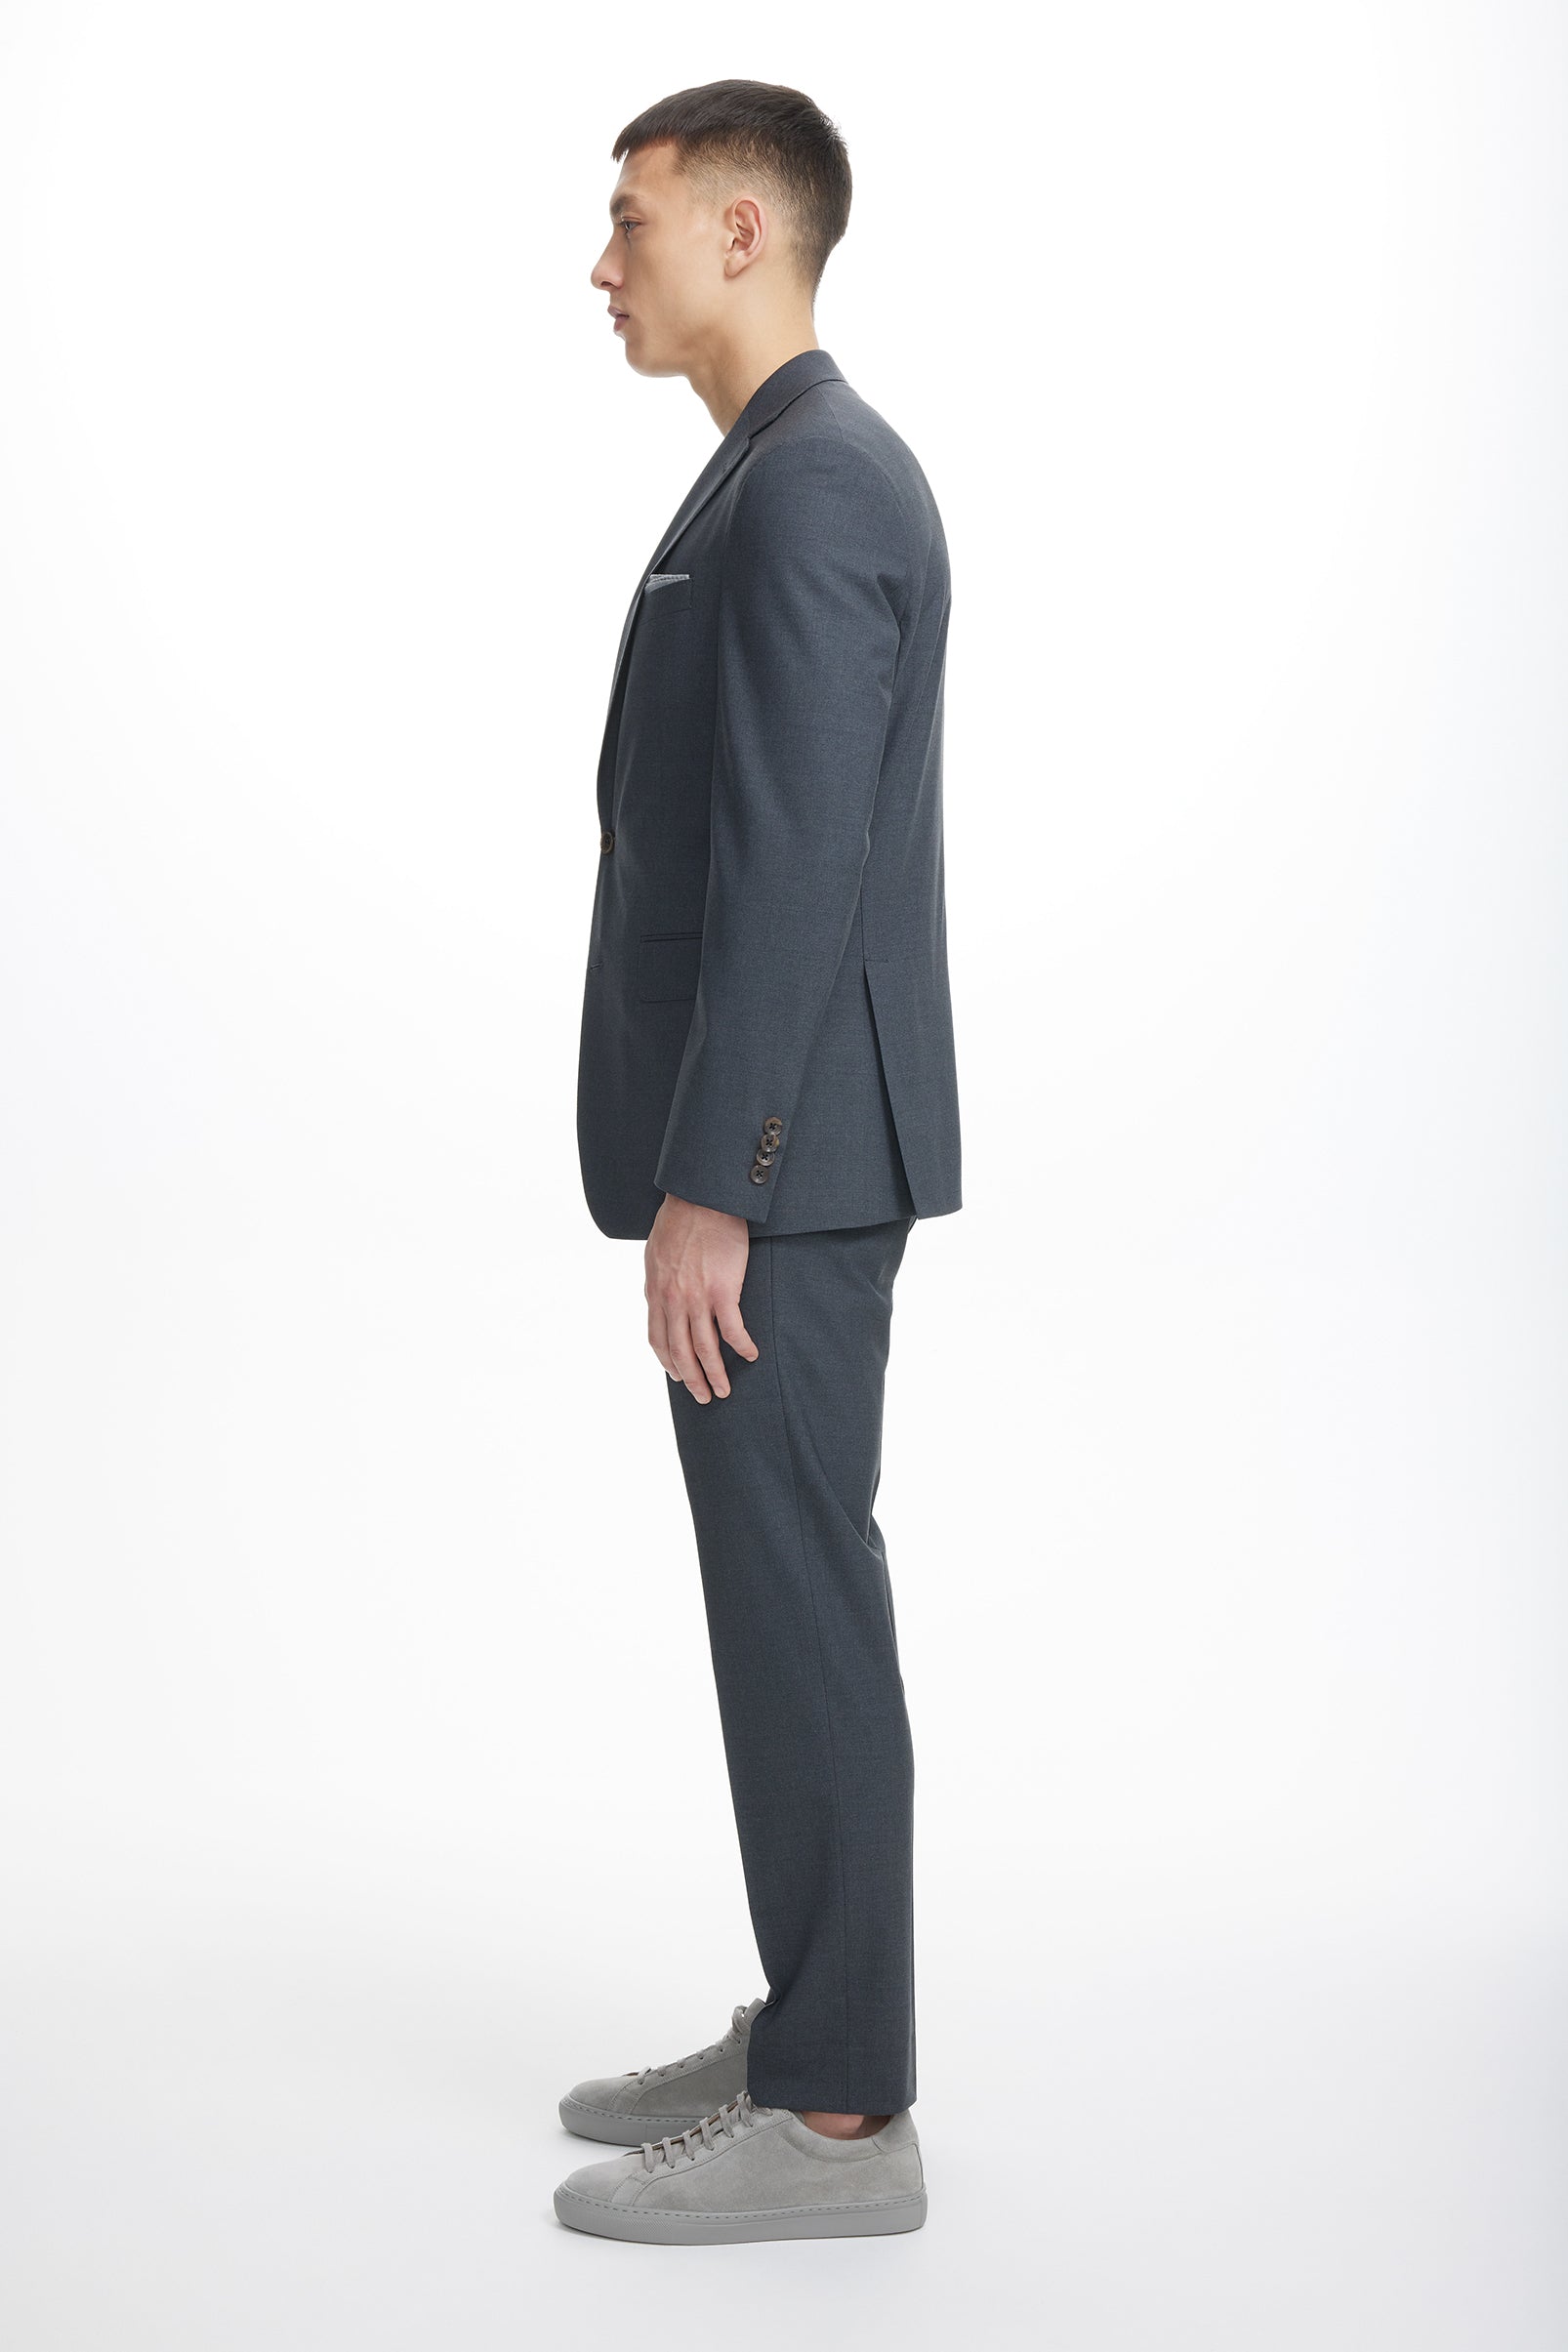 Alt view 3 Dean Solid Wool Stretch Suit in Charcoal